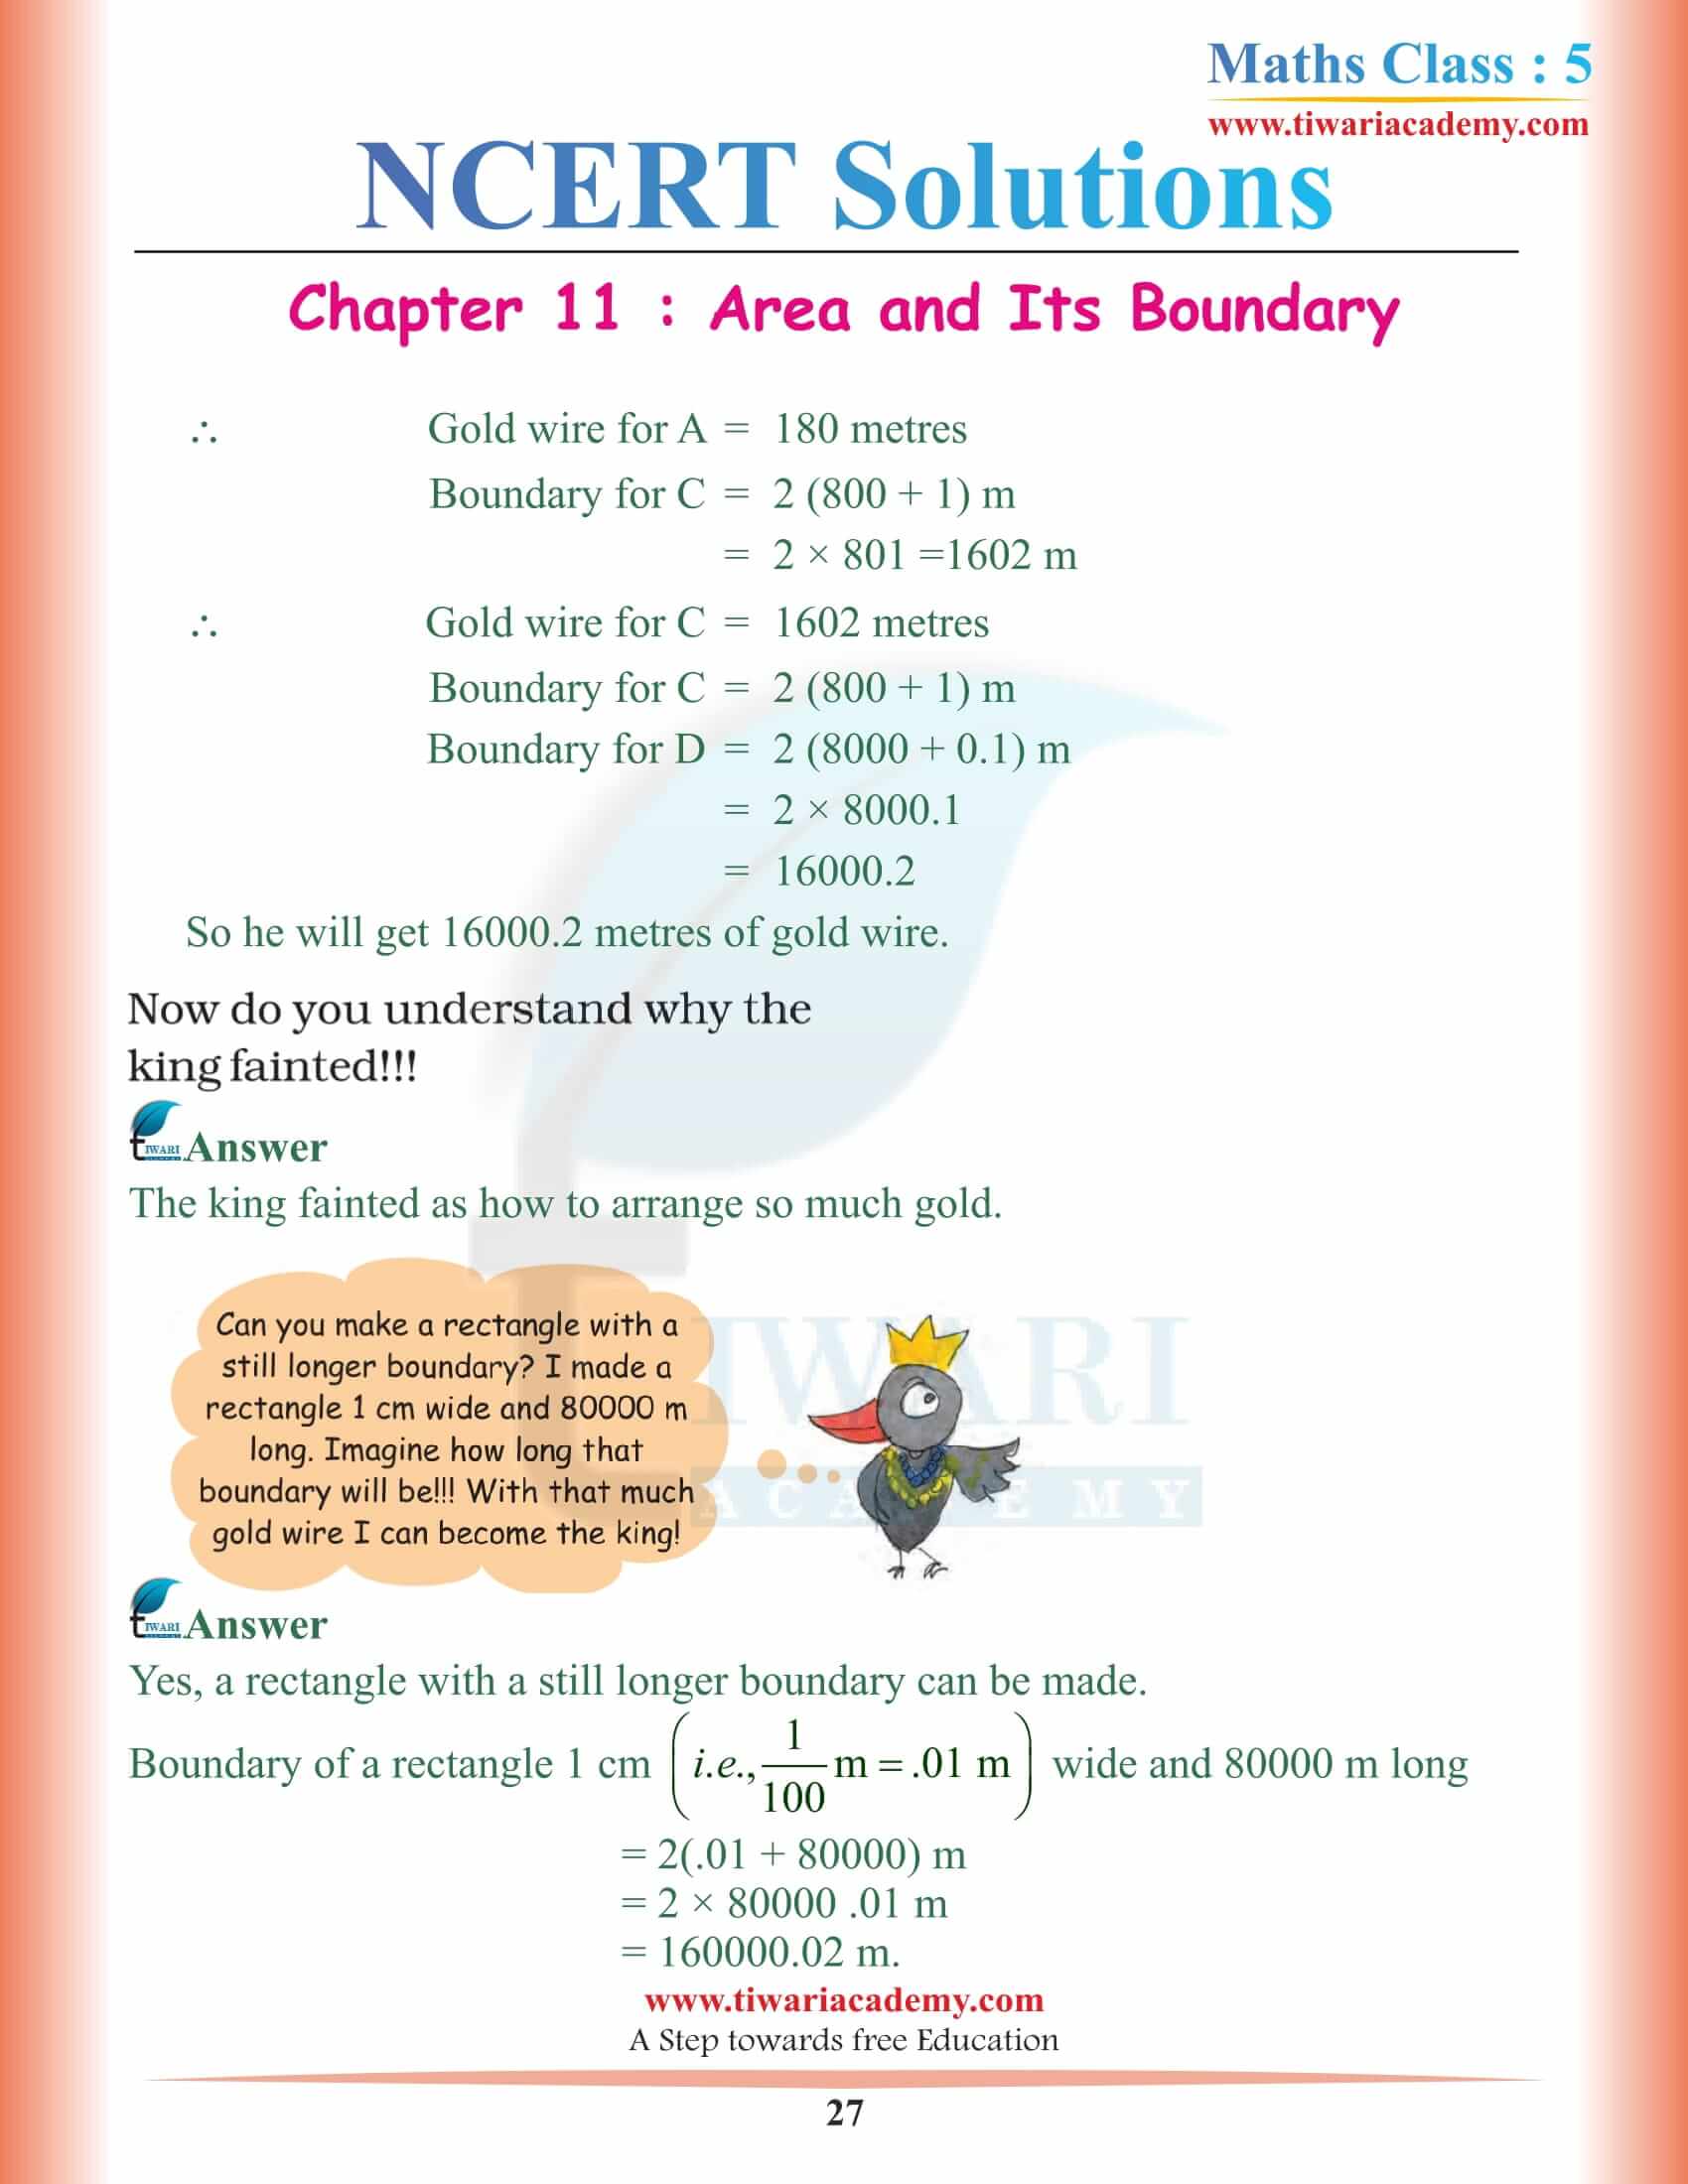 5th Math NCERT Chapter 11 Solutions Free of cost